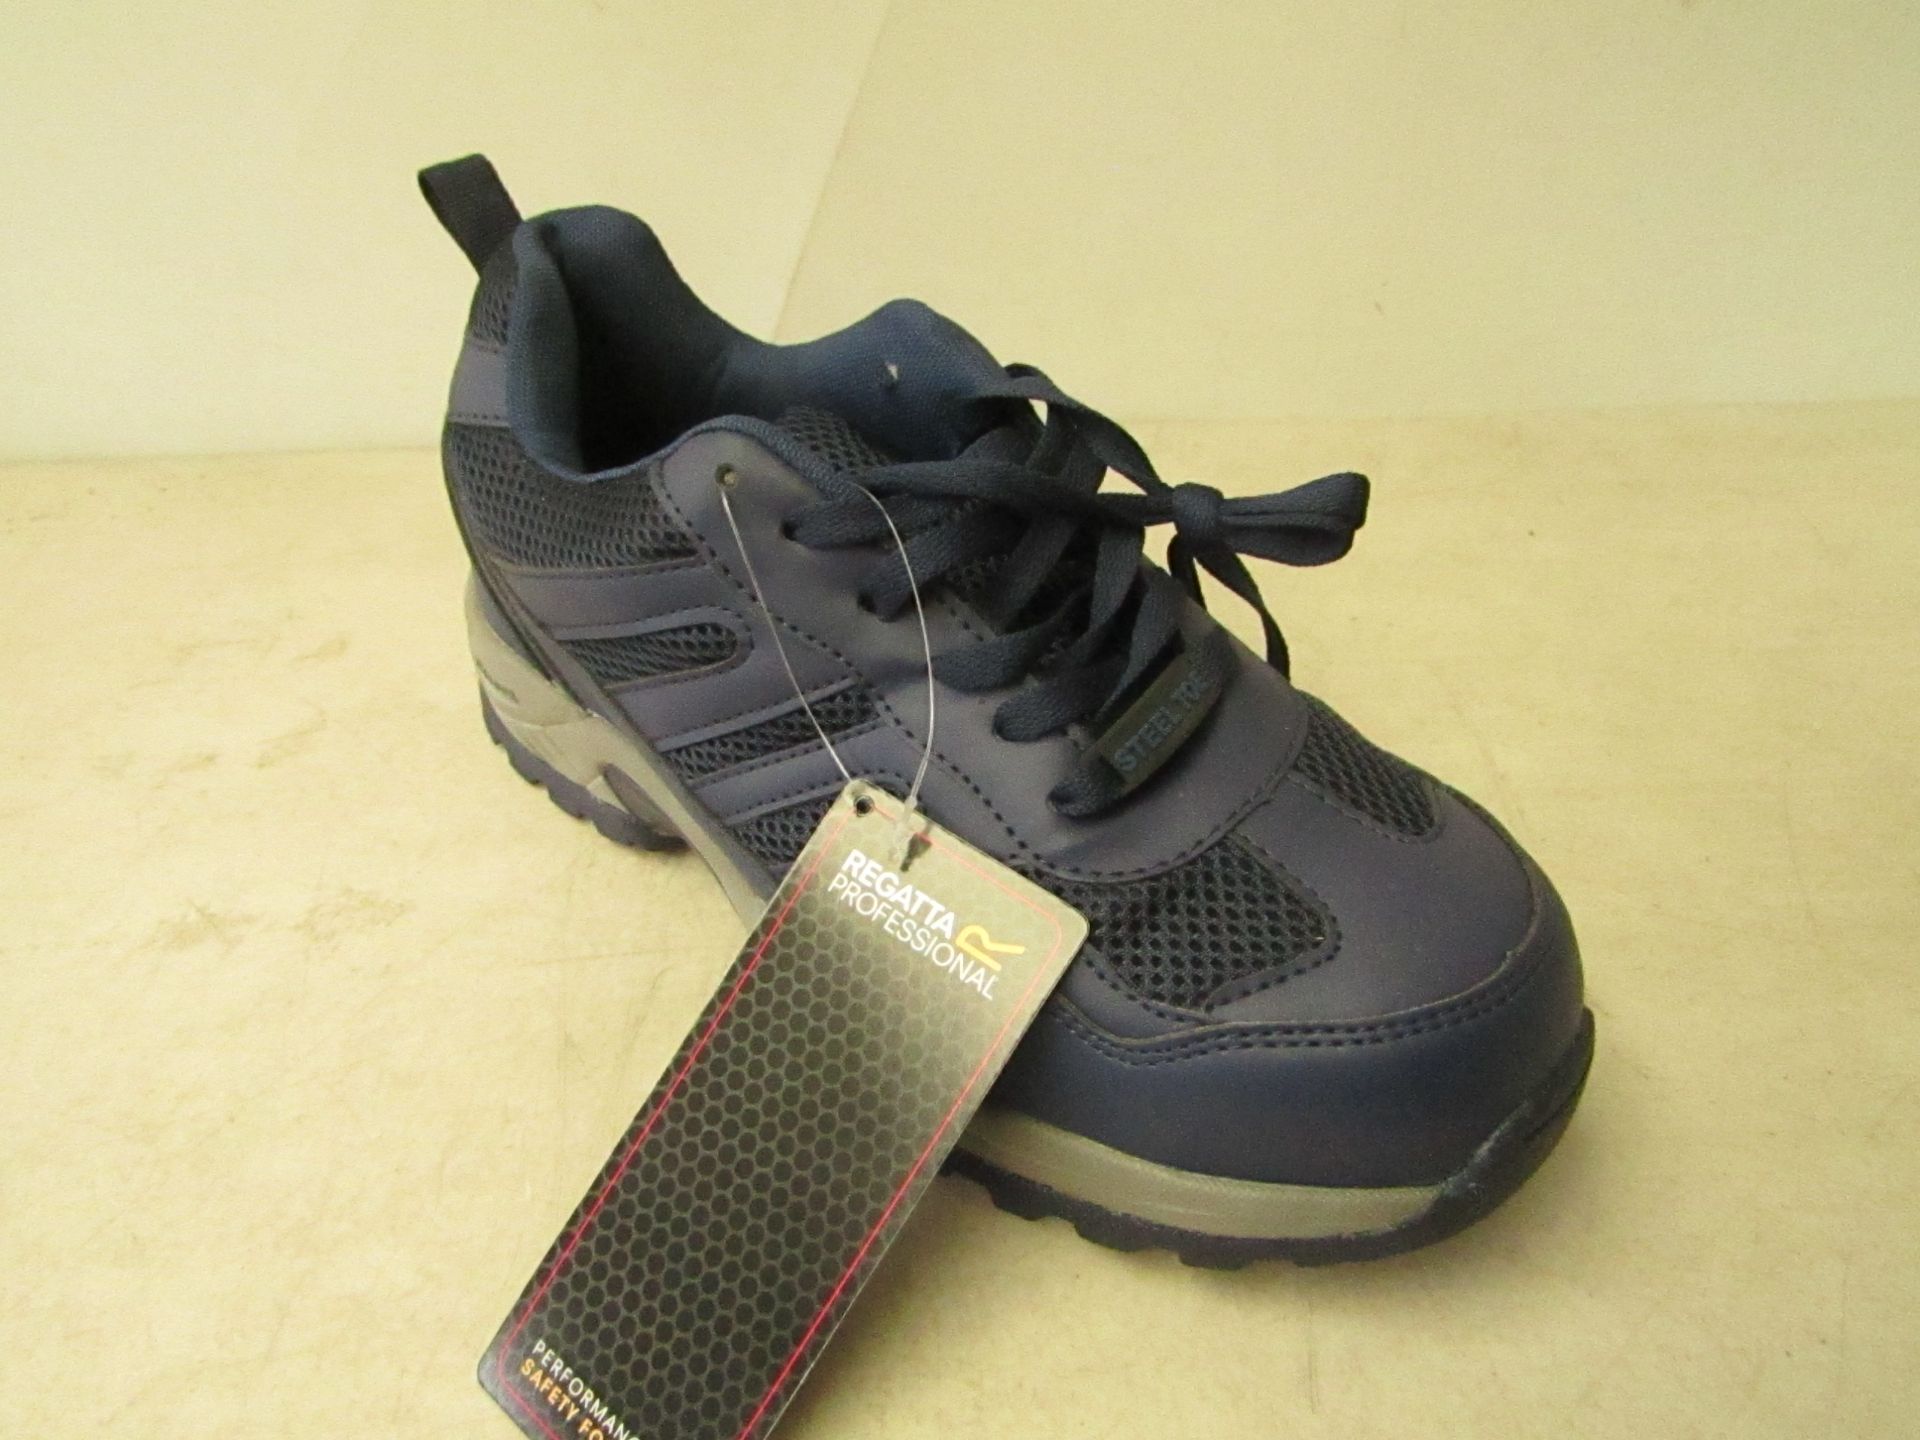 Regatta Professional StepLite safety trainers, size 9, new and boxed.